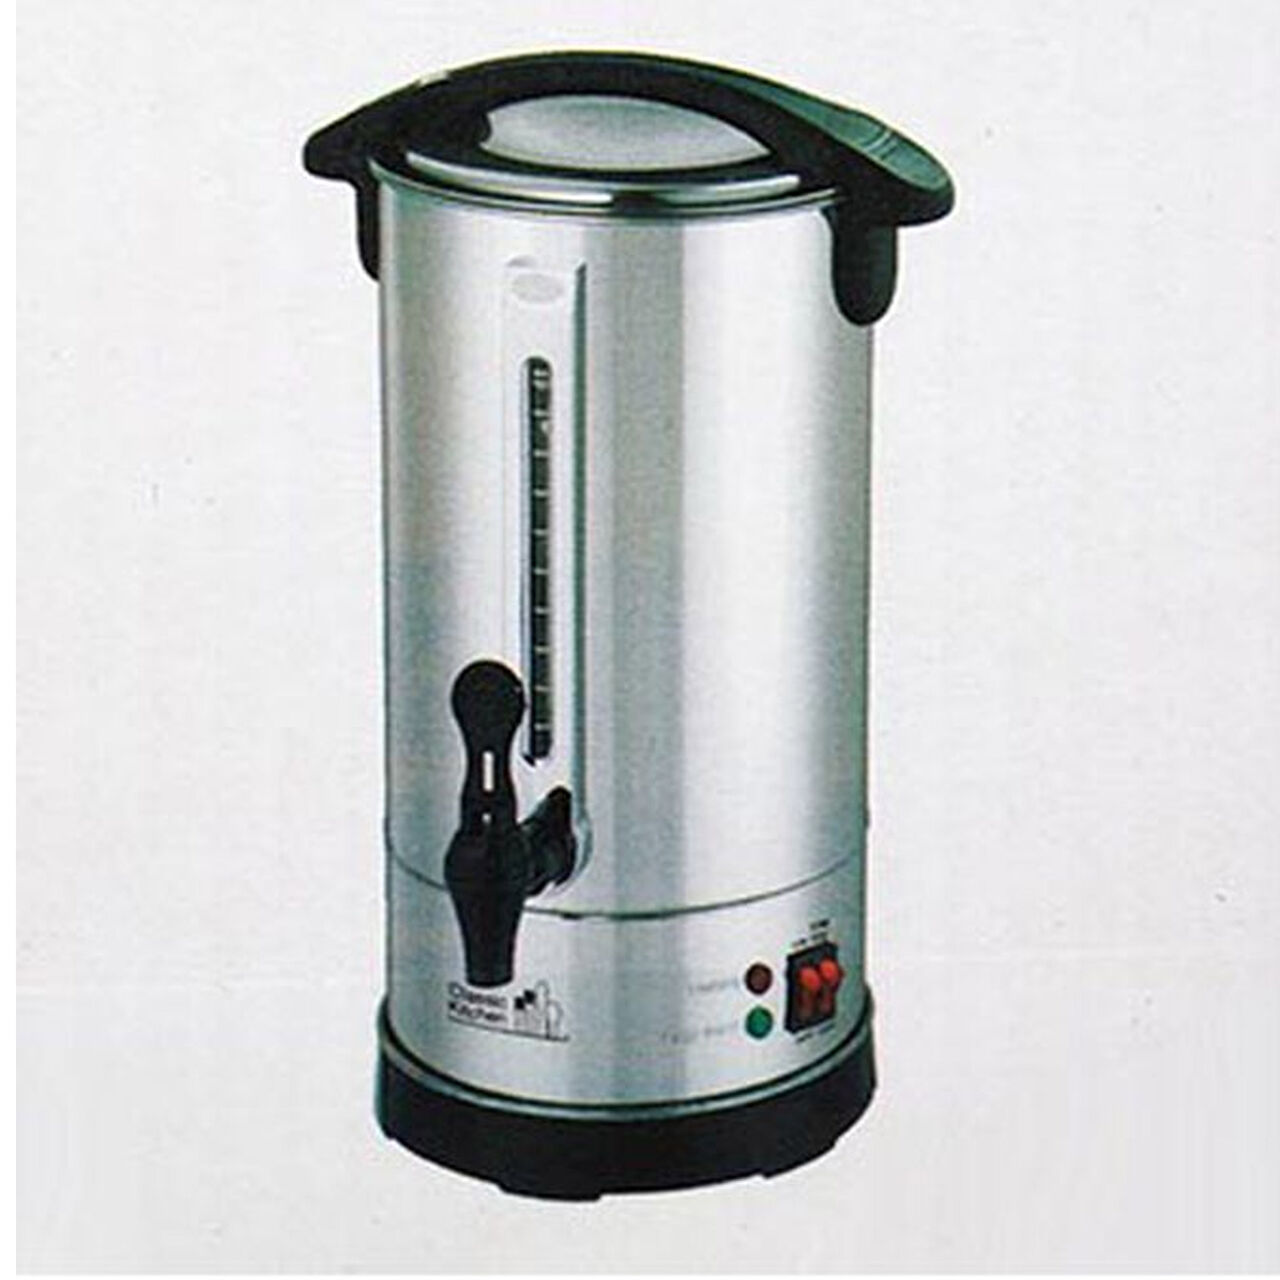 Classic Kitchen Electric Urn for Instant Hot Water  #CK840, , large image number 0